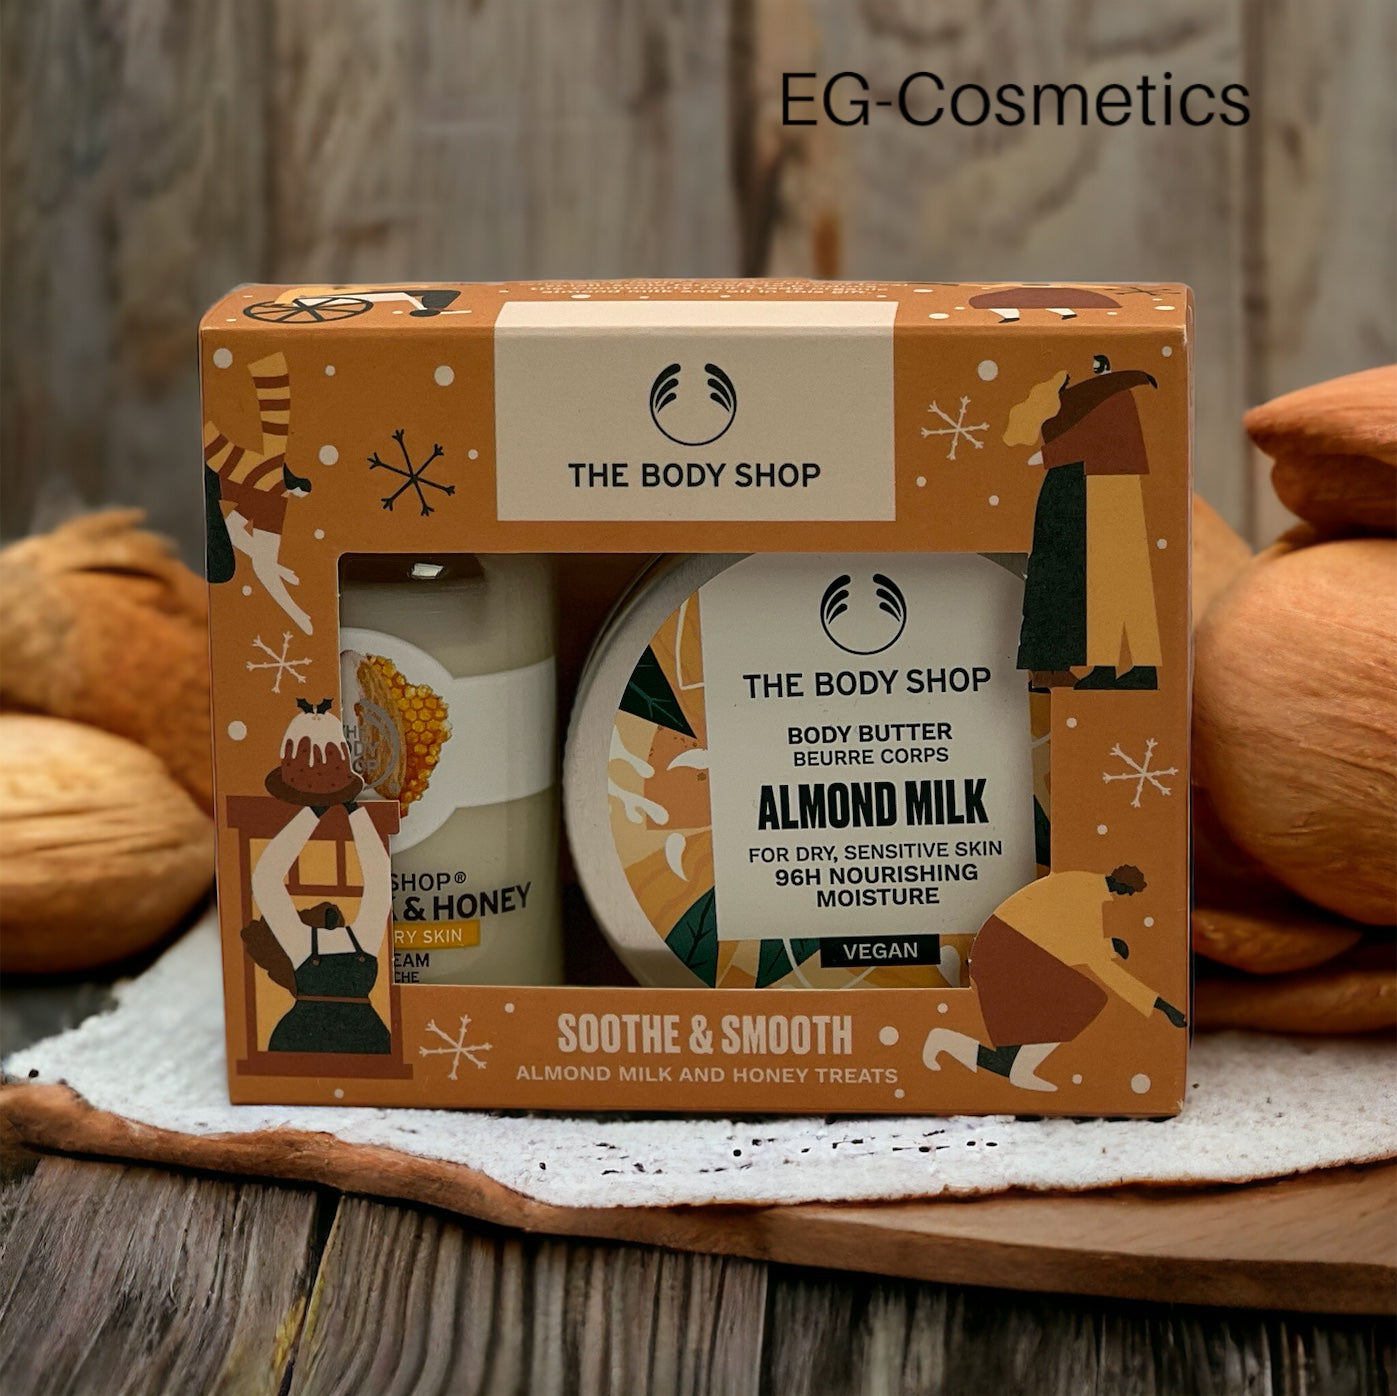 The Body Shop Soothe & Smooth Almond Milk Treats